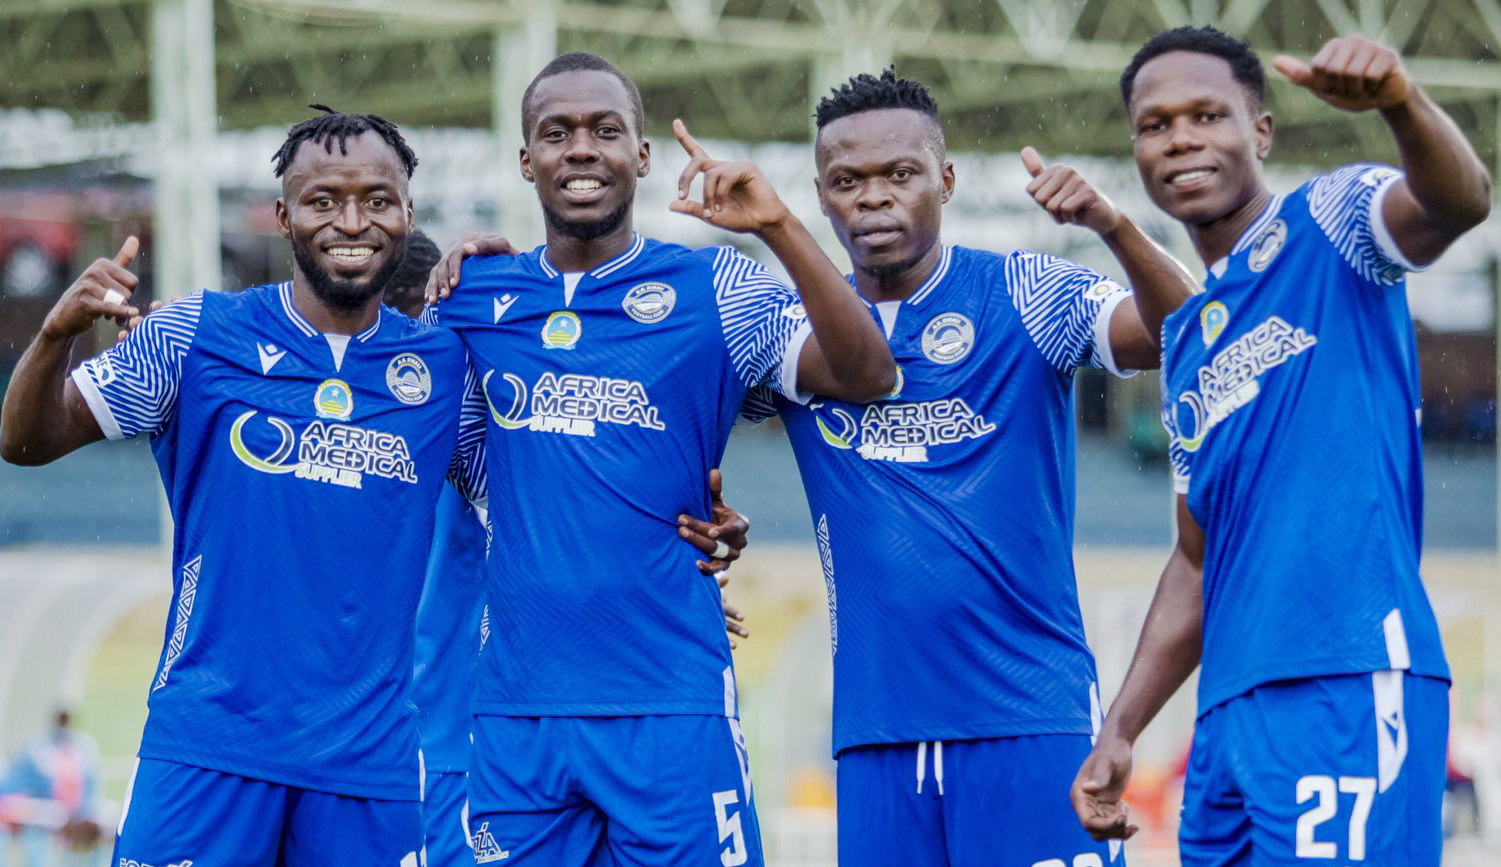 AS Kigali have qualified for the first round of the 2021 CAF Confederation Cup after stunning Comoros side Olympique de Missiri 6-0 in Kigali (Courtesy)